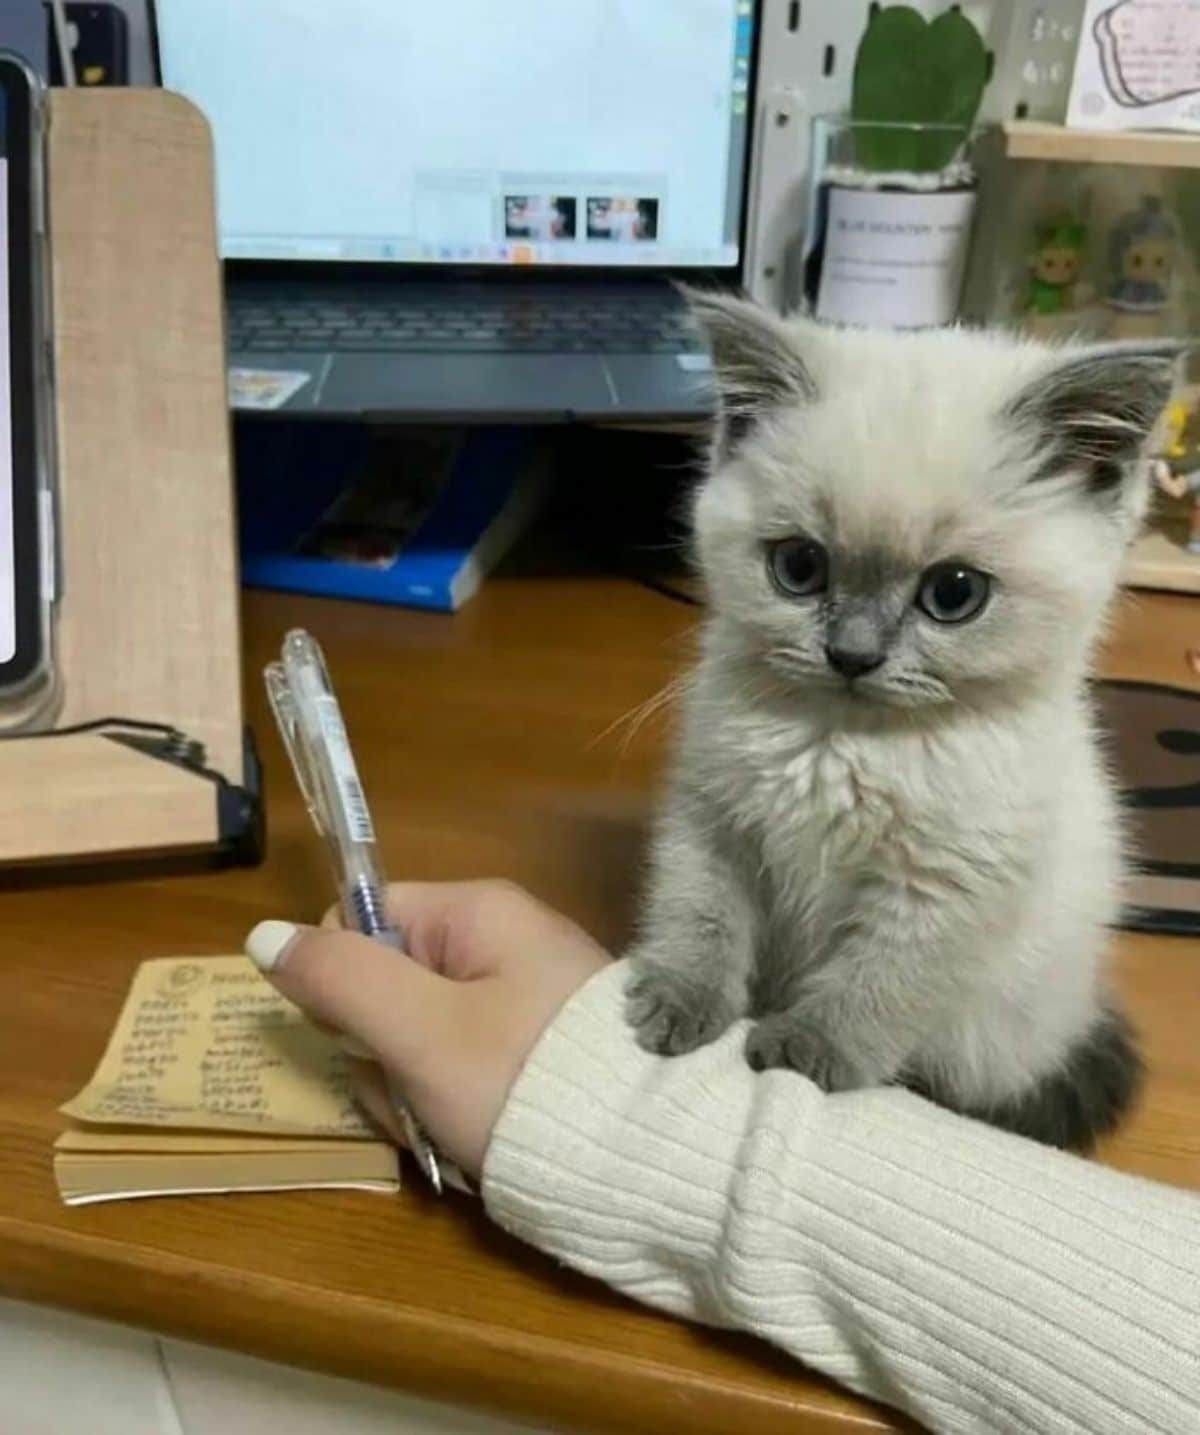 white and grey kitten on a wooden table with the front paws placed on a sweatered arm of a person who is writing a list